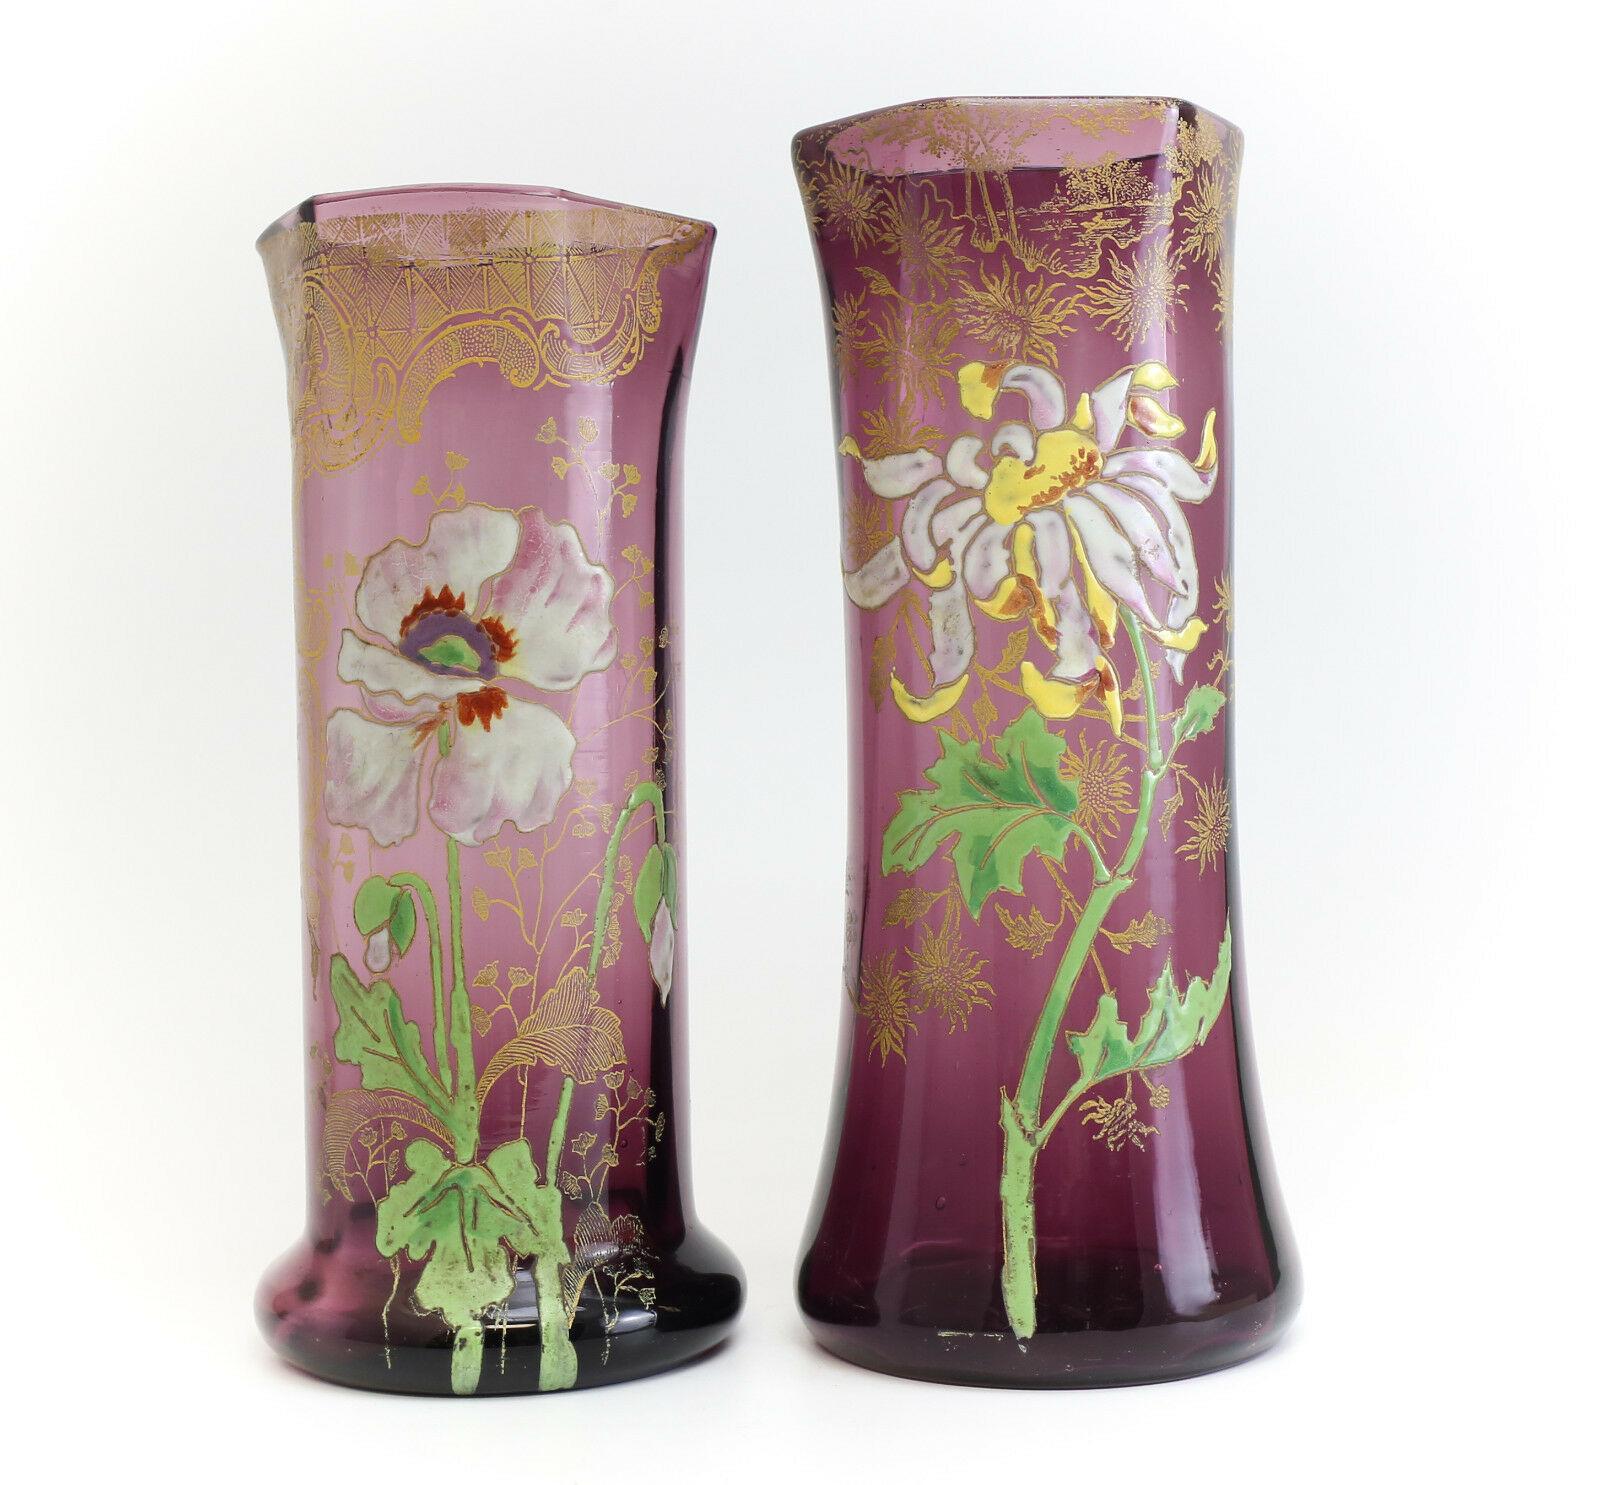 Two Amethyst Art Glass Mont Joye Tall Vases - Features Hand painted Raised Enamel Floral designs and gold gilt details.

Additional information:
Handmade: Yes 
Material: Glass
Type: Vase 
Features: Hand Painted
Brand: ArtGlass 
Production